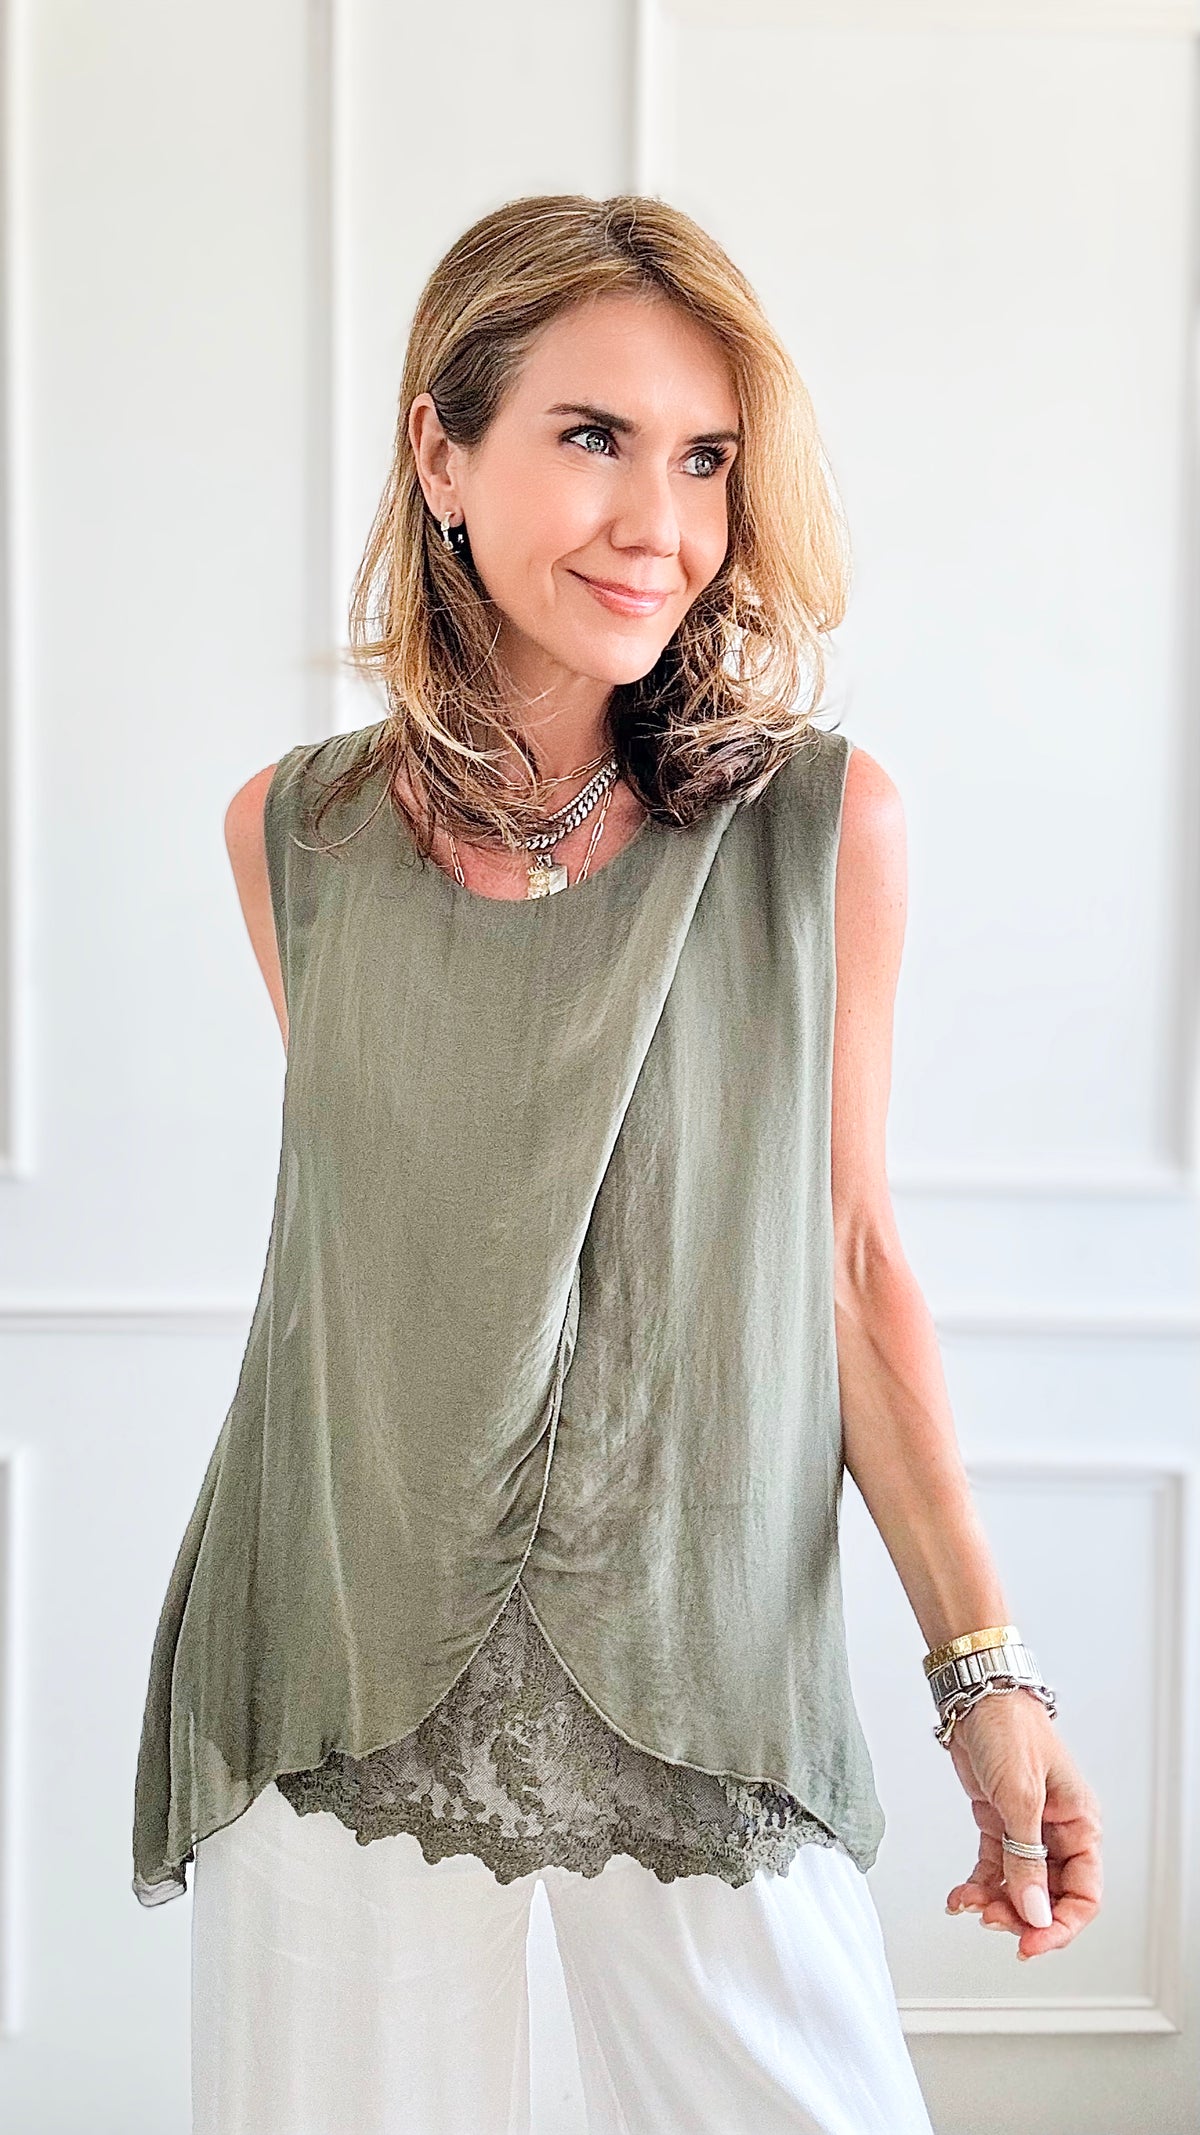 Sheer Sophistication Italian Top - Olive-110 Short Sleeve Tops-Germany-Coastal Bloom Boutique, find the trendiest versions of the popular styles and looks Located in Indialantic, FL